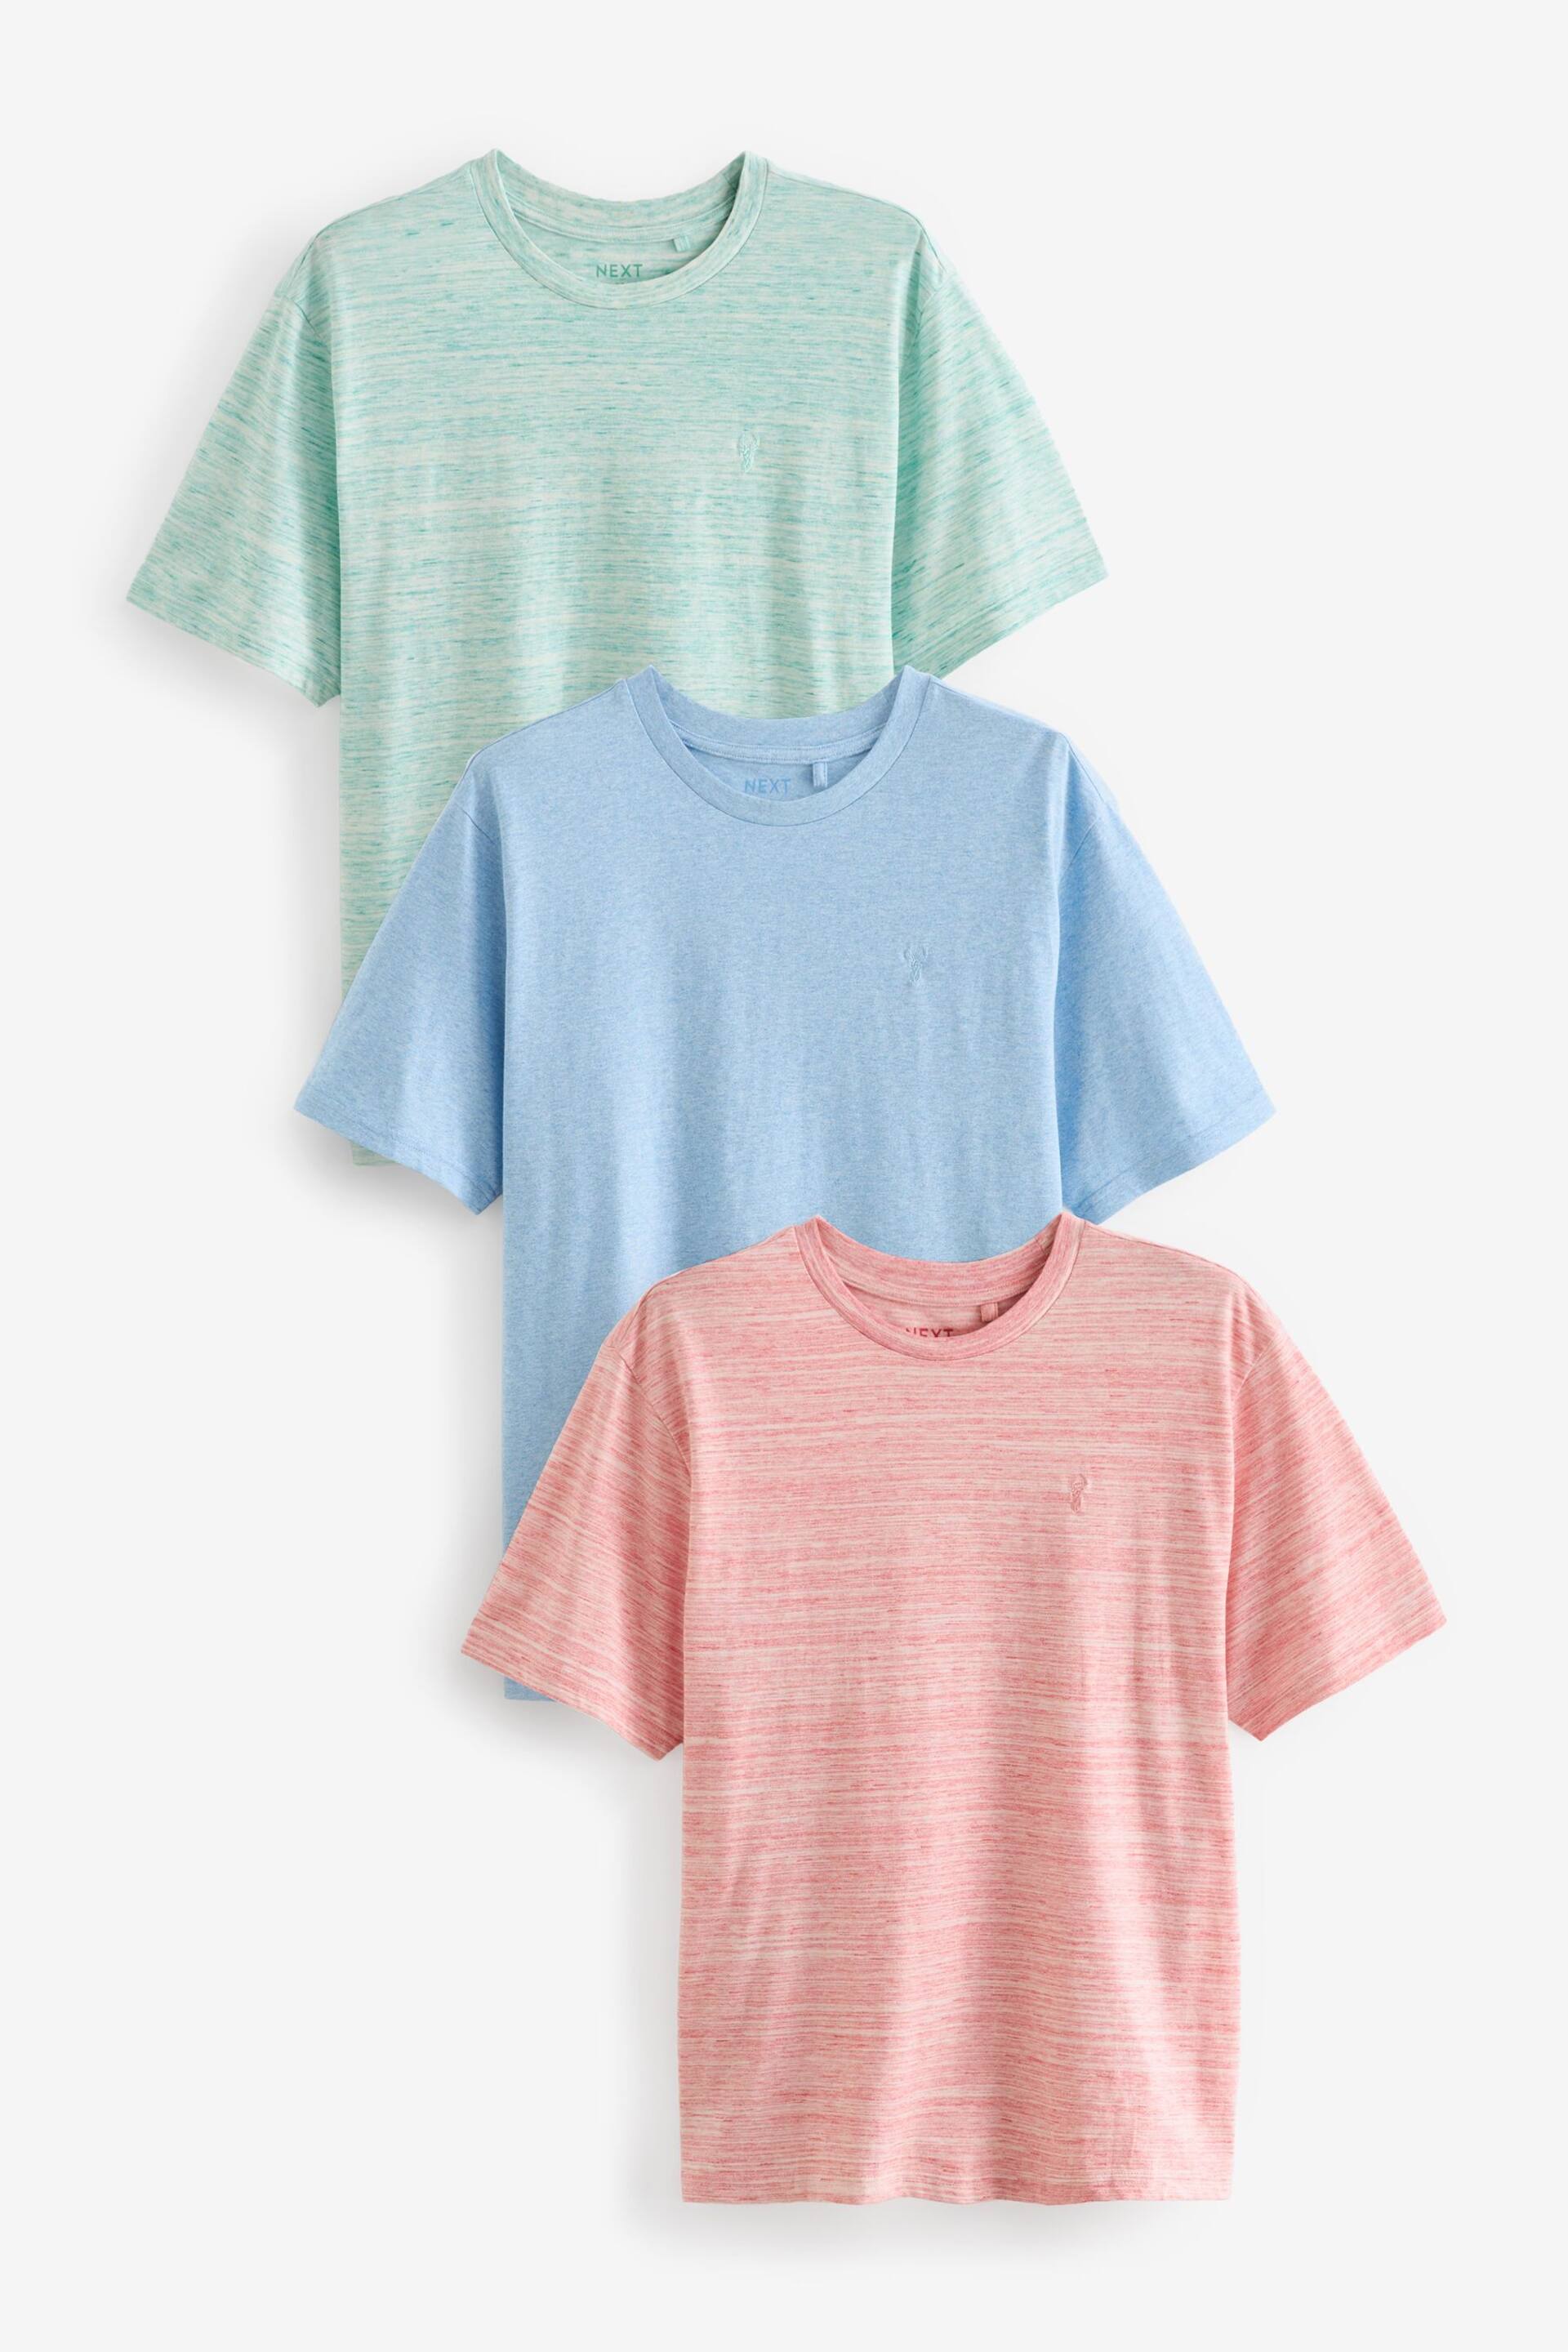 Blue/Mint Green/Pink 3PK Stag Marl T-Shirts - Image 8 of 12